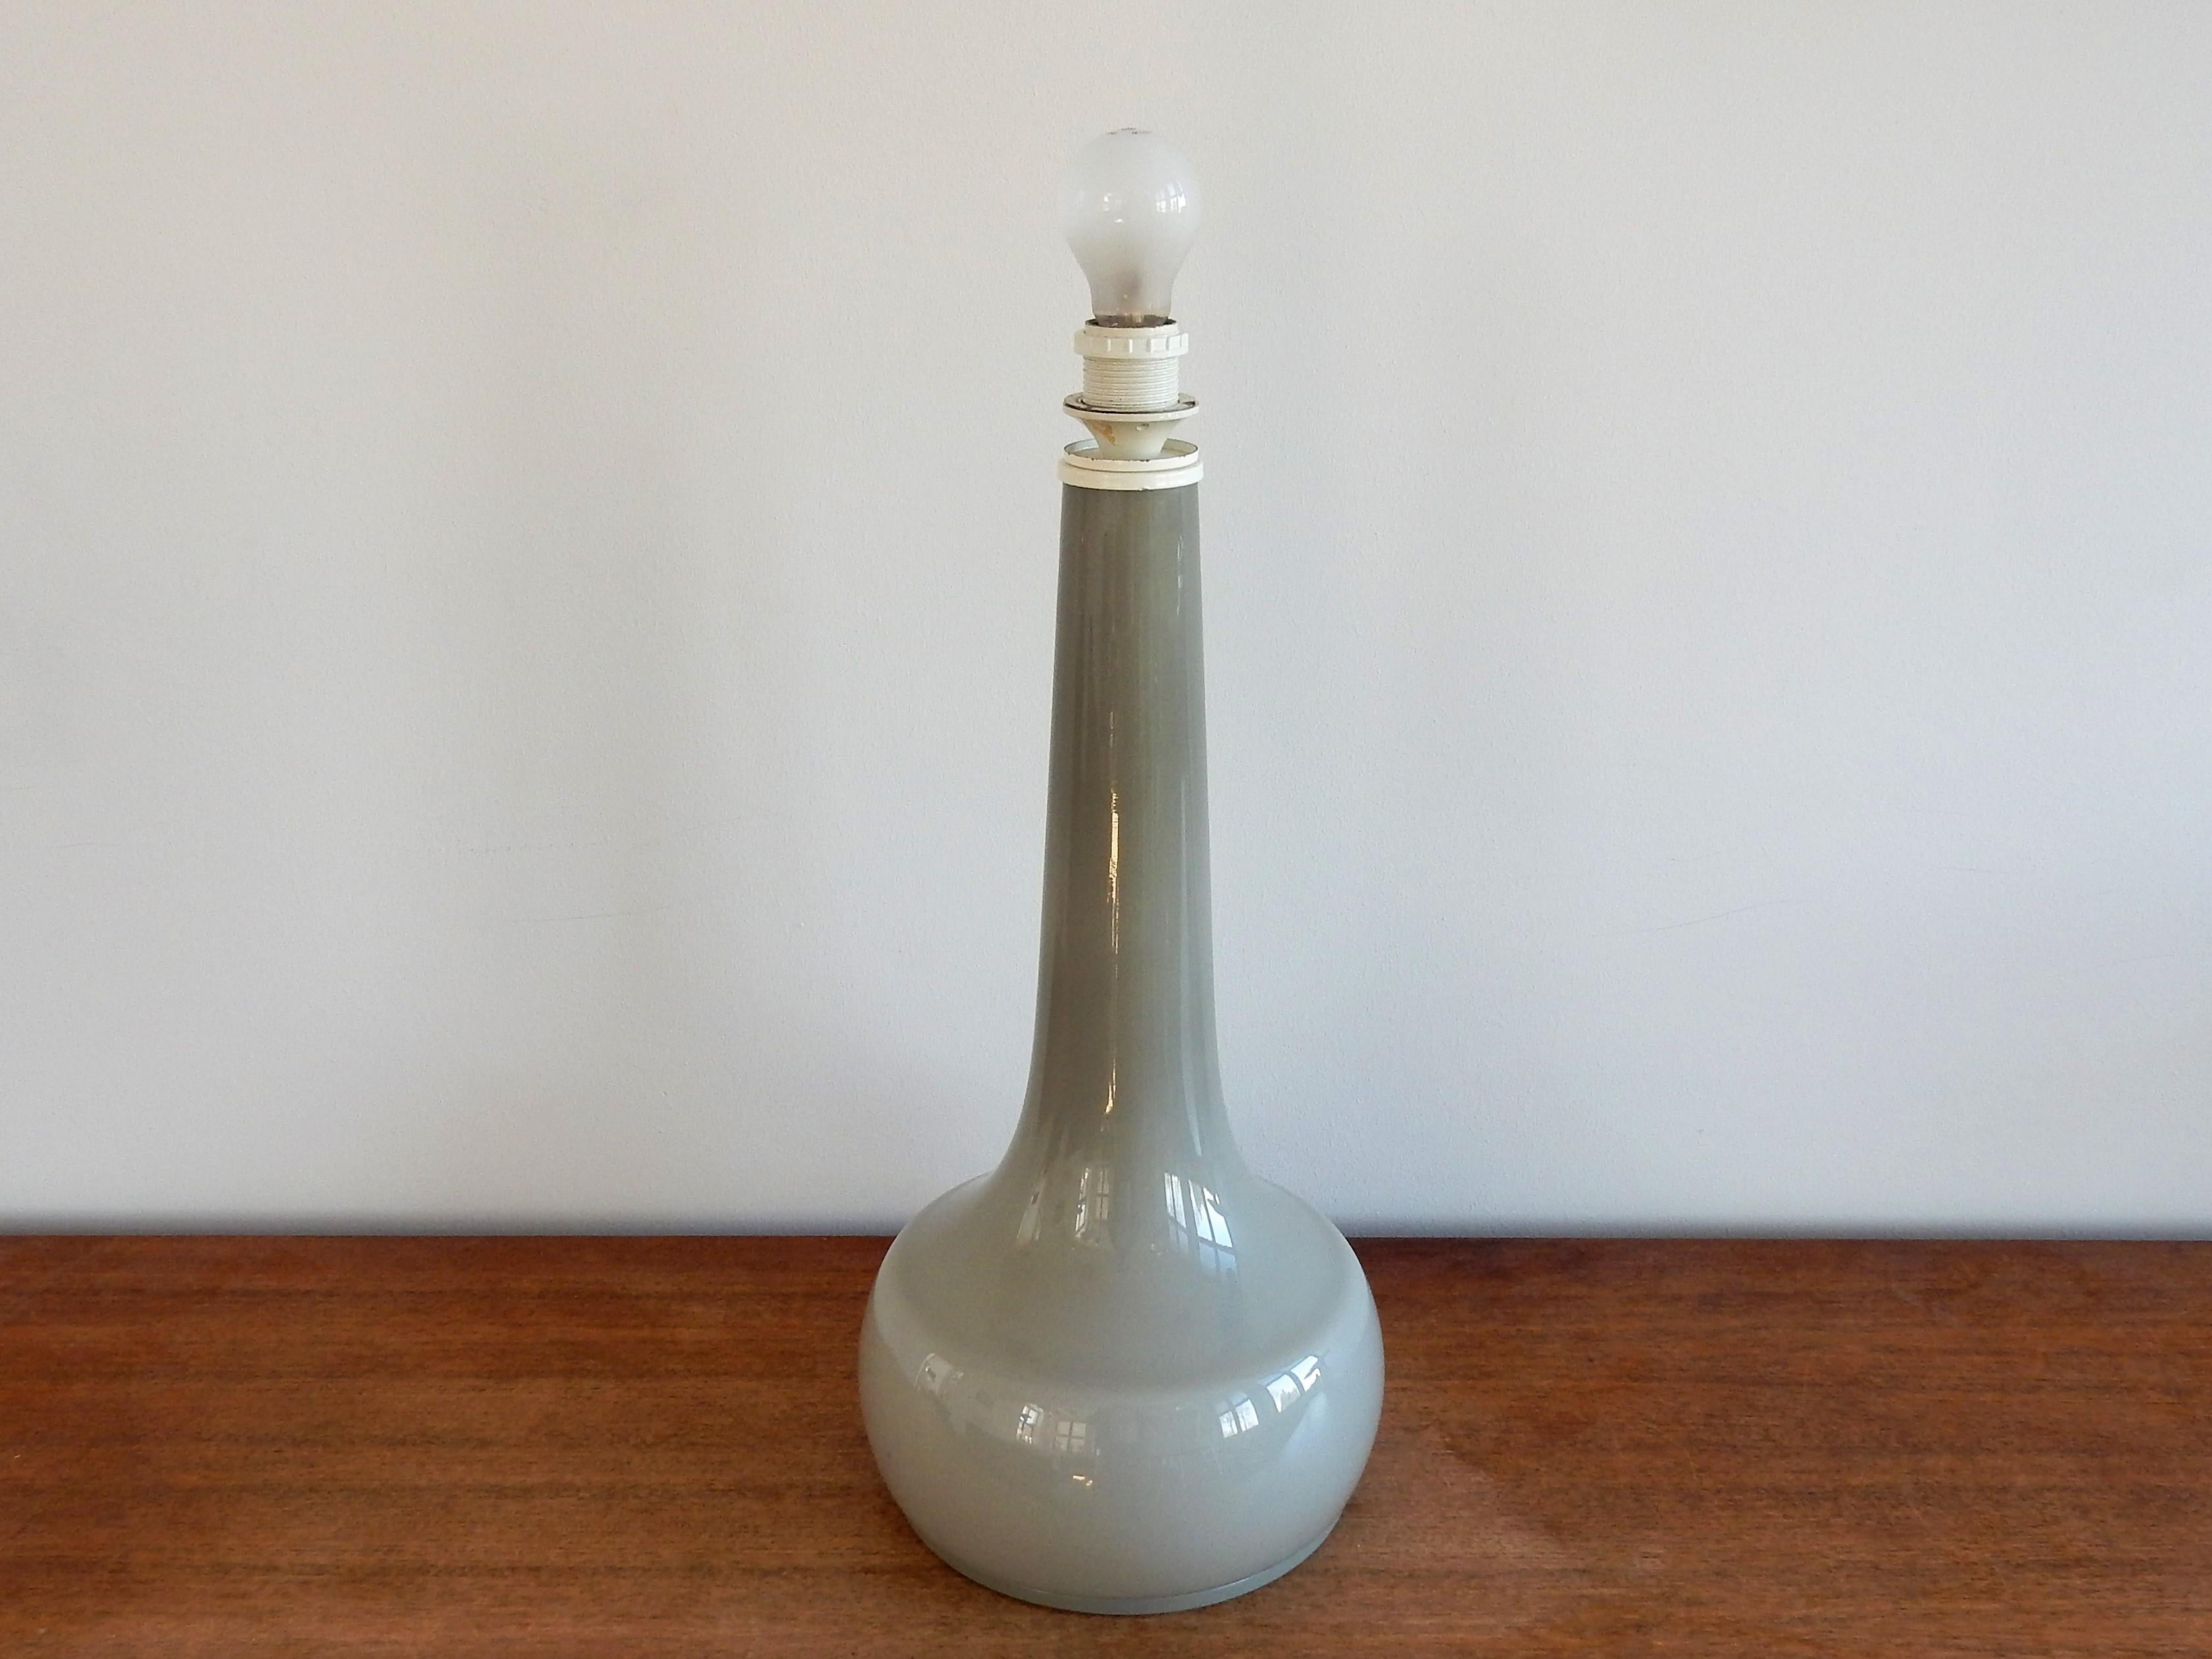 This exceptionally large vintage table lamp is made of thick grey colored glass. The type of glass and design seems Danish. It could be very well be Holmegaard. The lamp is in a good condition with minor signs of age and use. 2 small spots on the